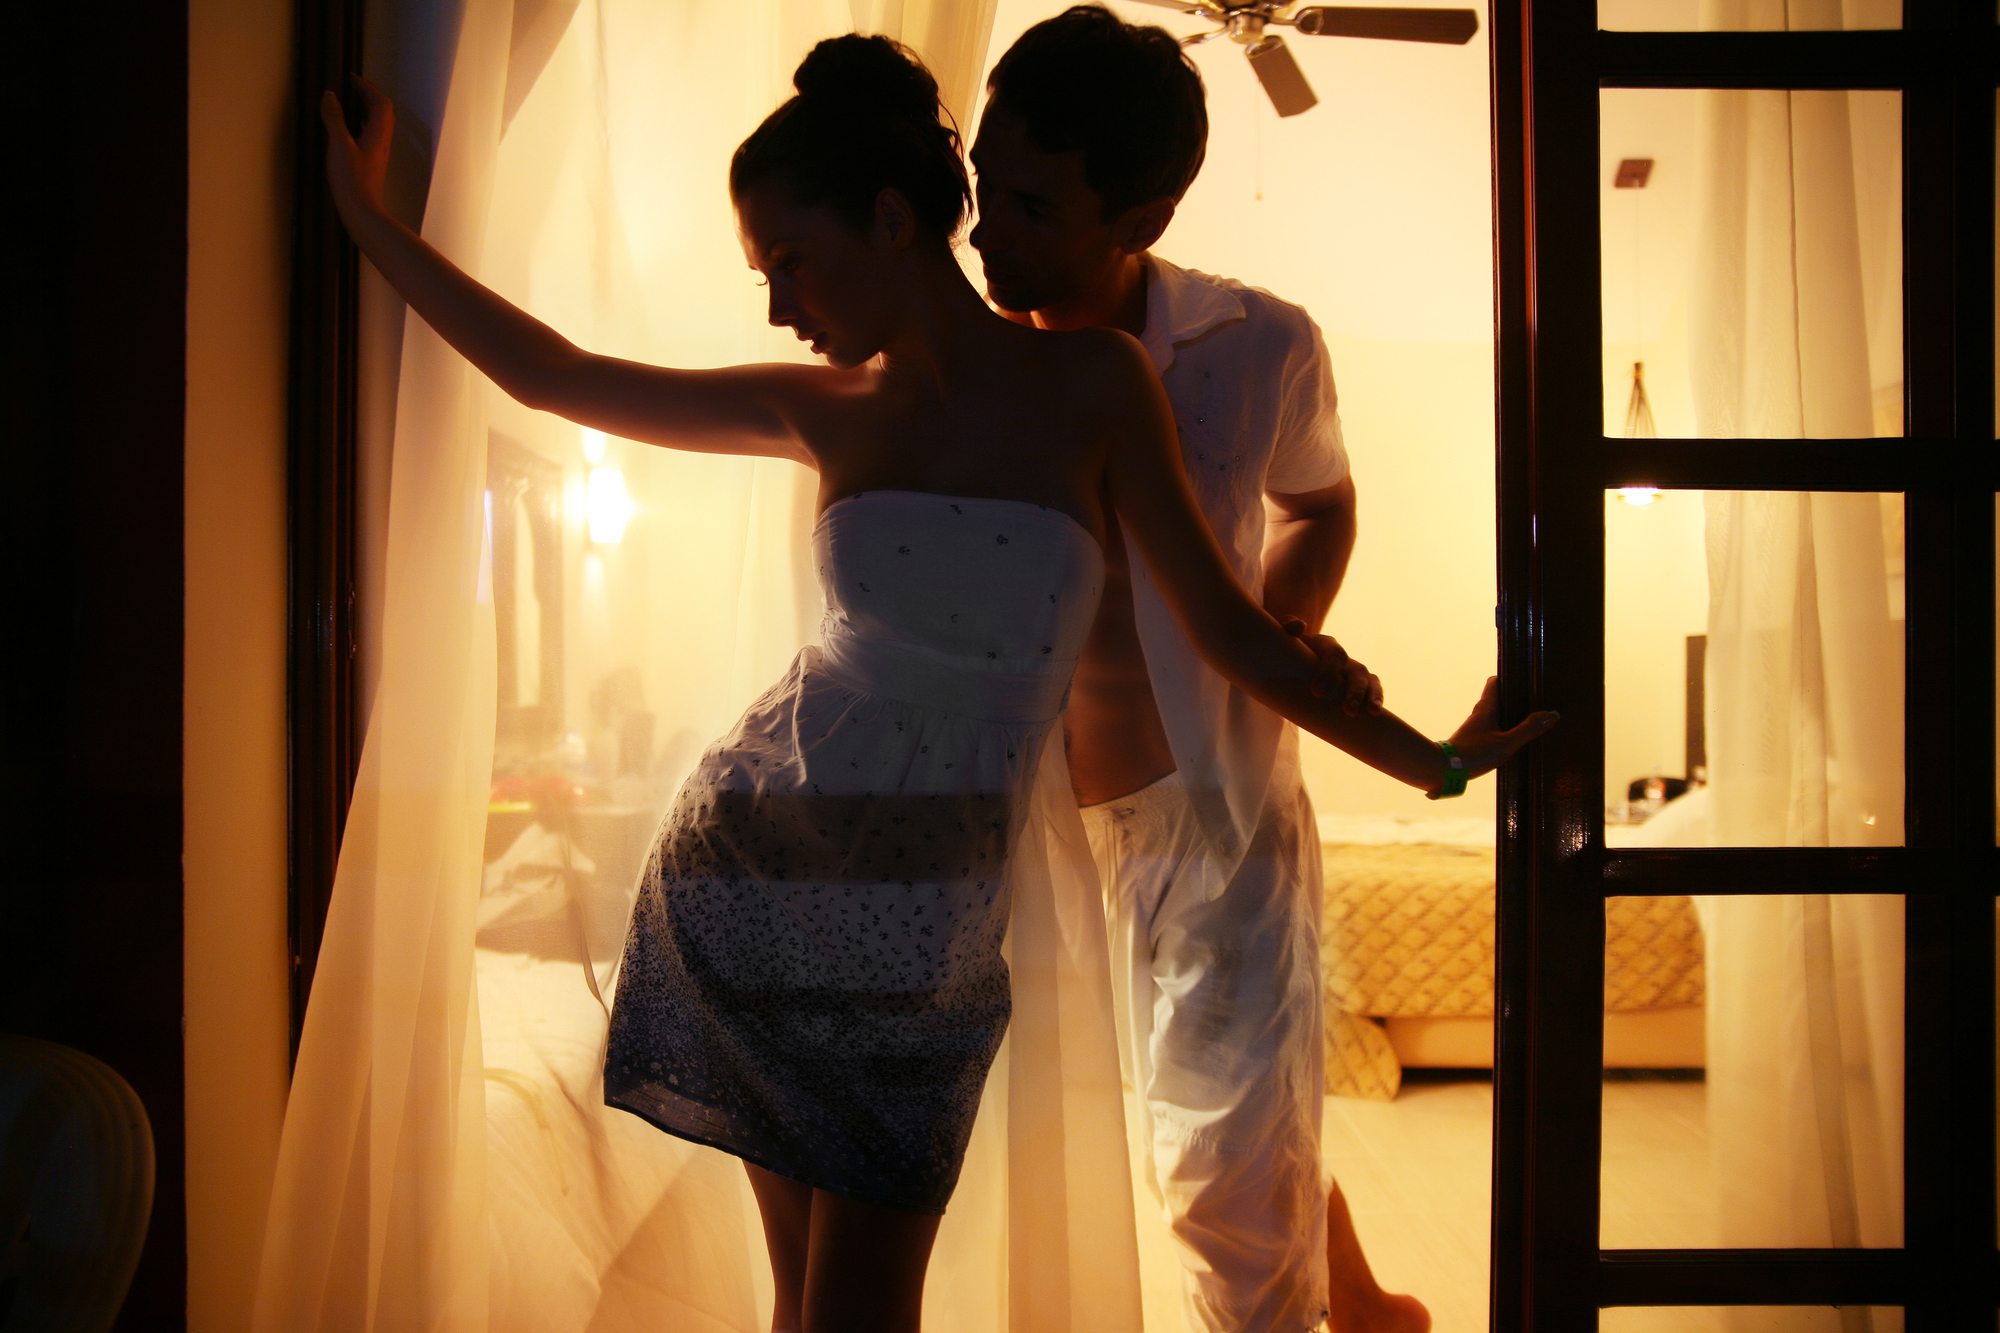 sexy date ideas - image of couple standing in front of open balcony door, lit from behind with golden yellow glow